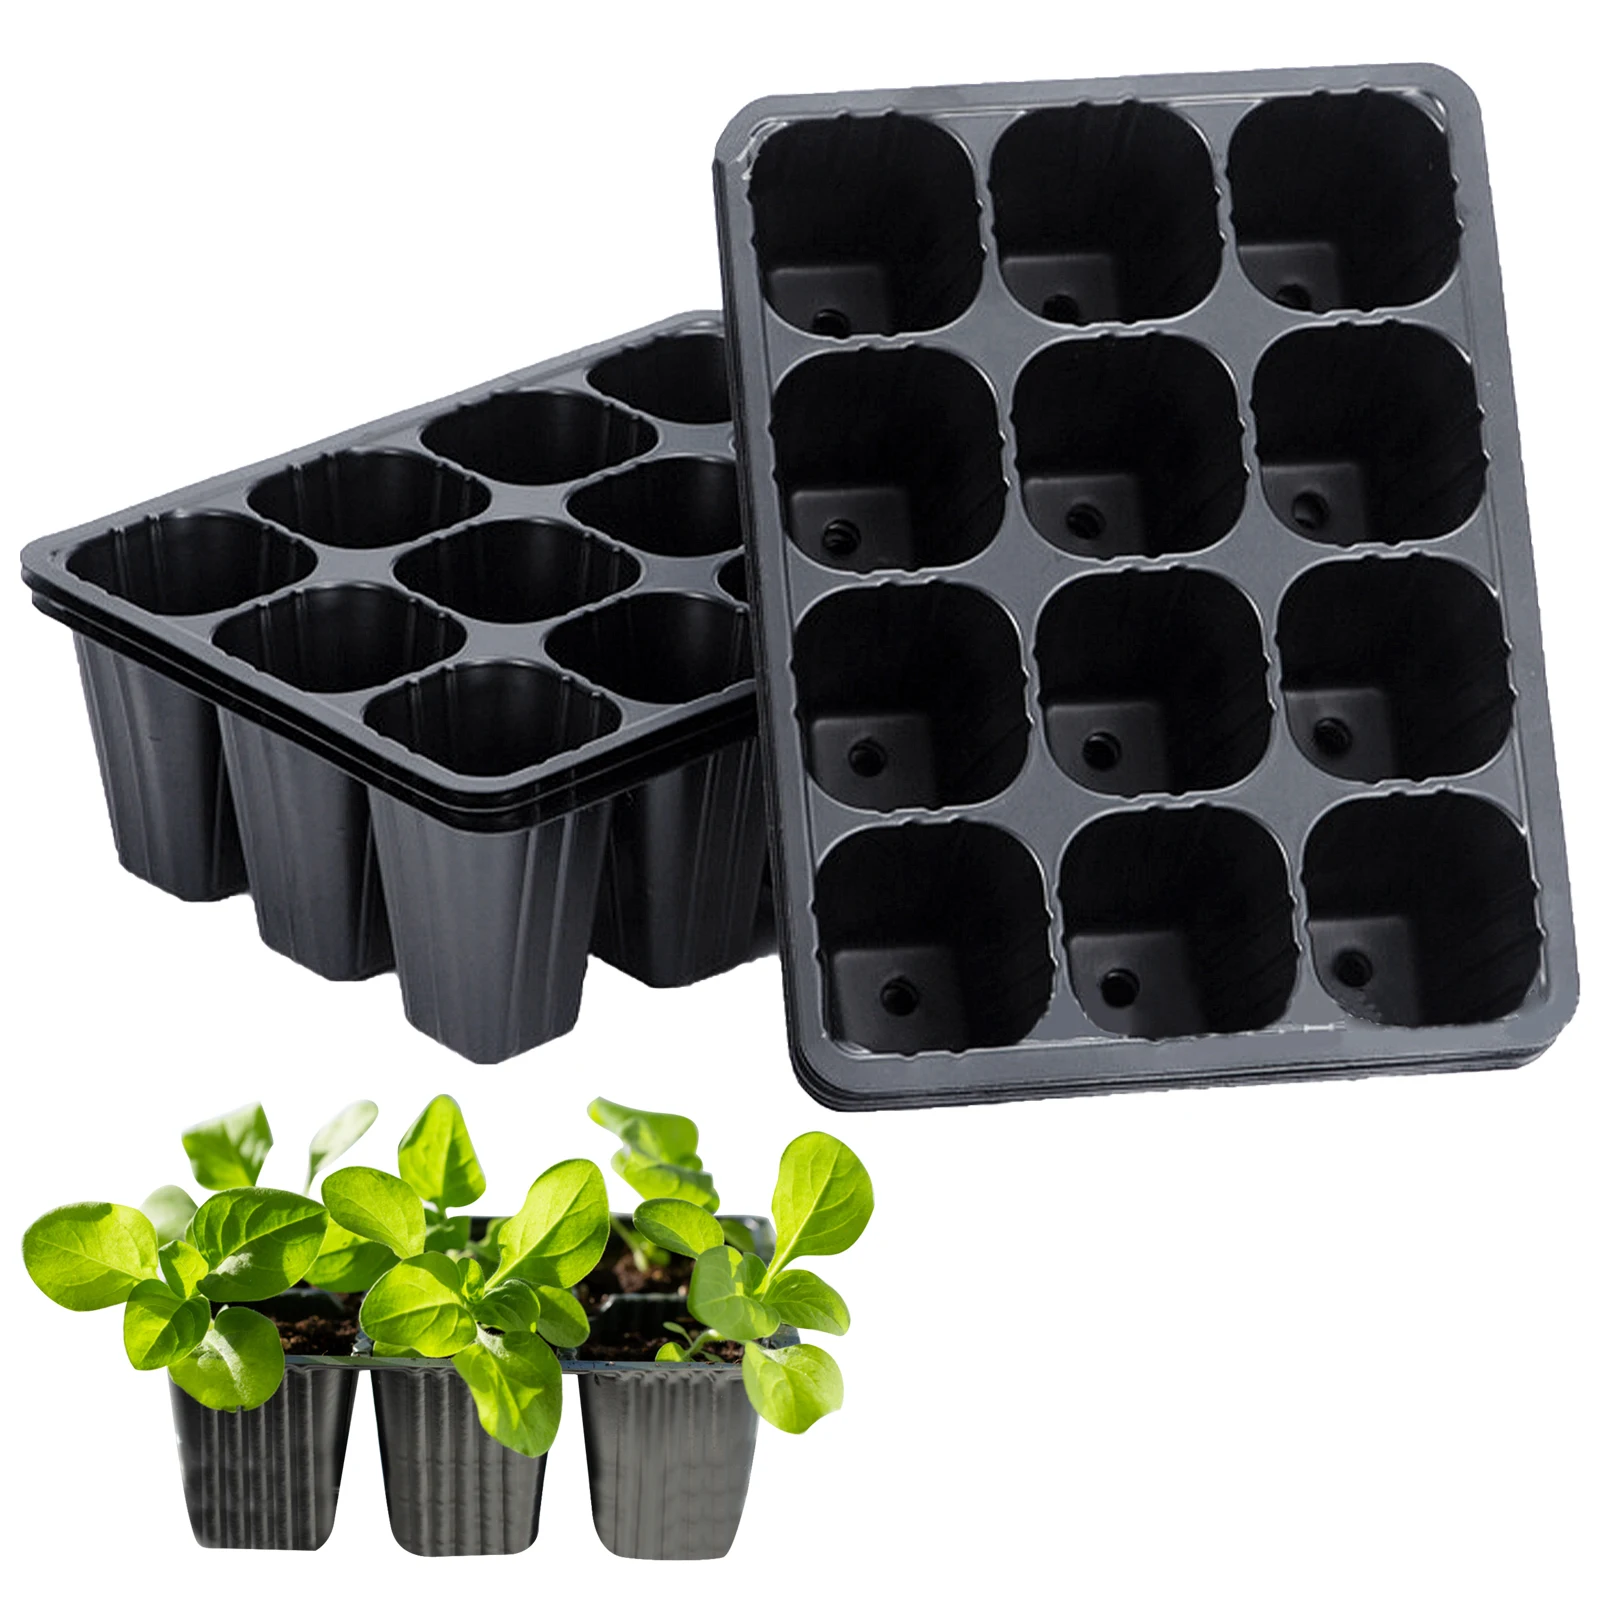 

10 Seed Trays 12 Cells Germination Propagation Trays Cavity Growing Seedlings Insert Recycled Plastic